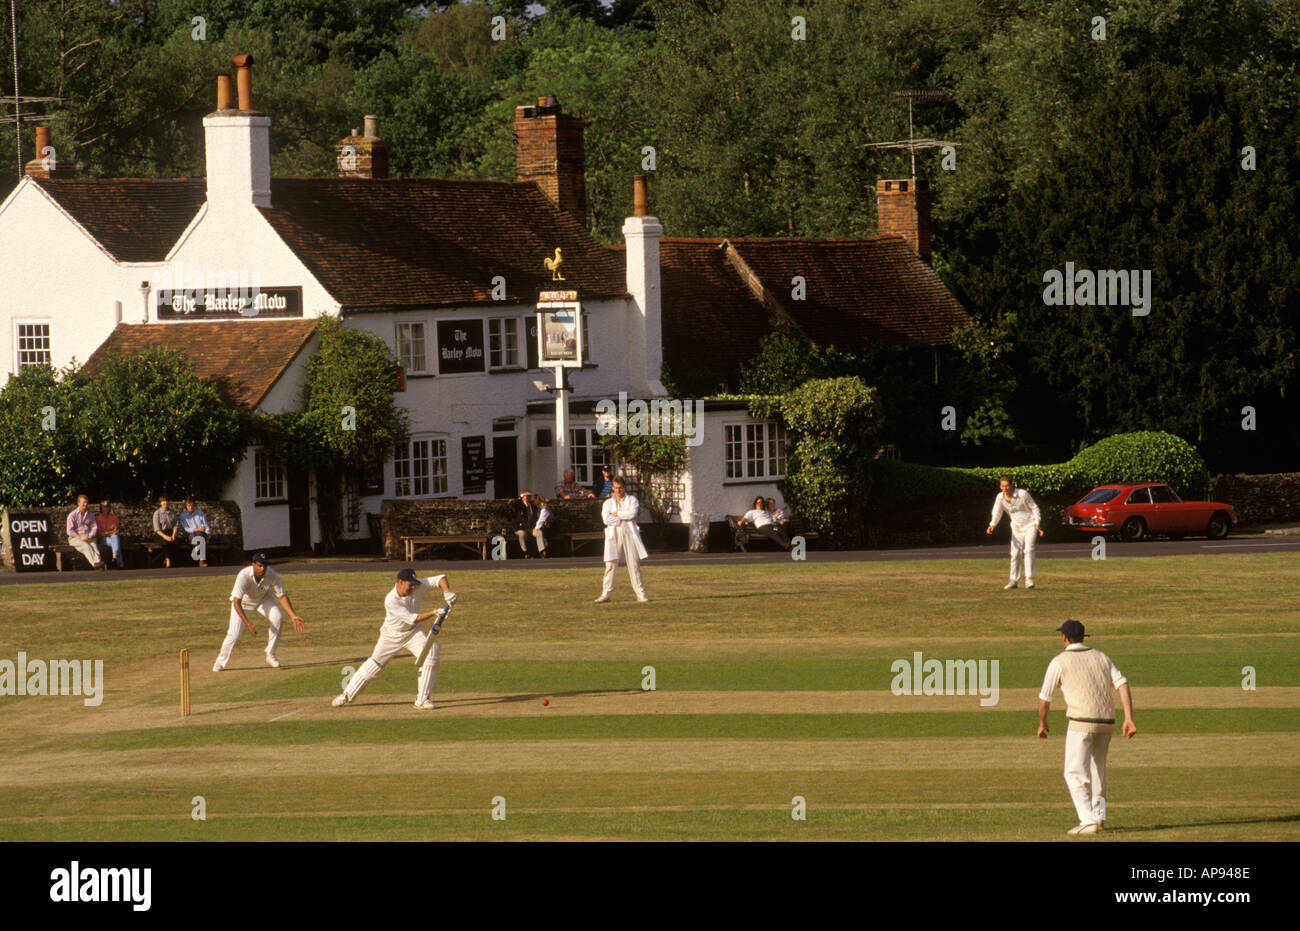 Village cricket at Tilford, Surrey. The Barley Mow the village local pub where there will be refreshments at the end of the game 1990s UK. HOMER SYKES Stock Photo